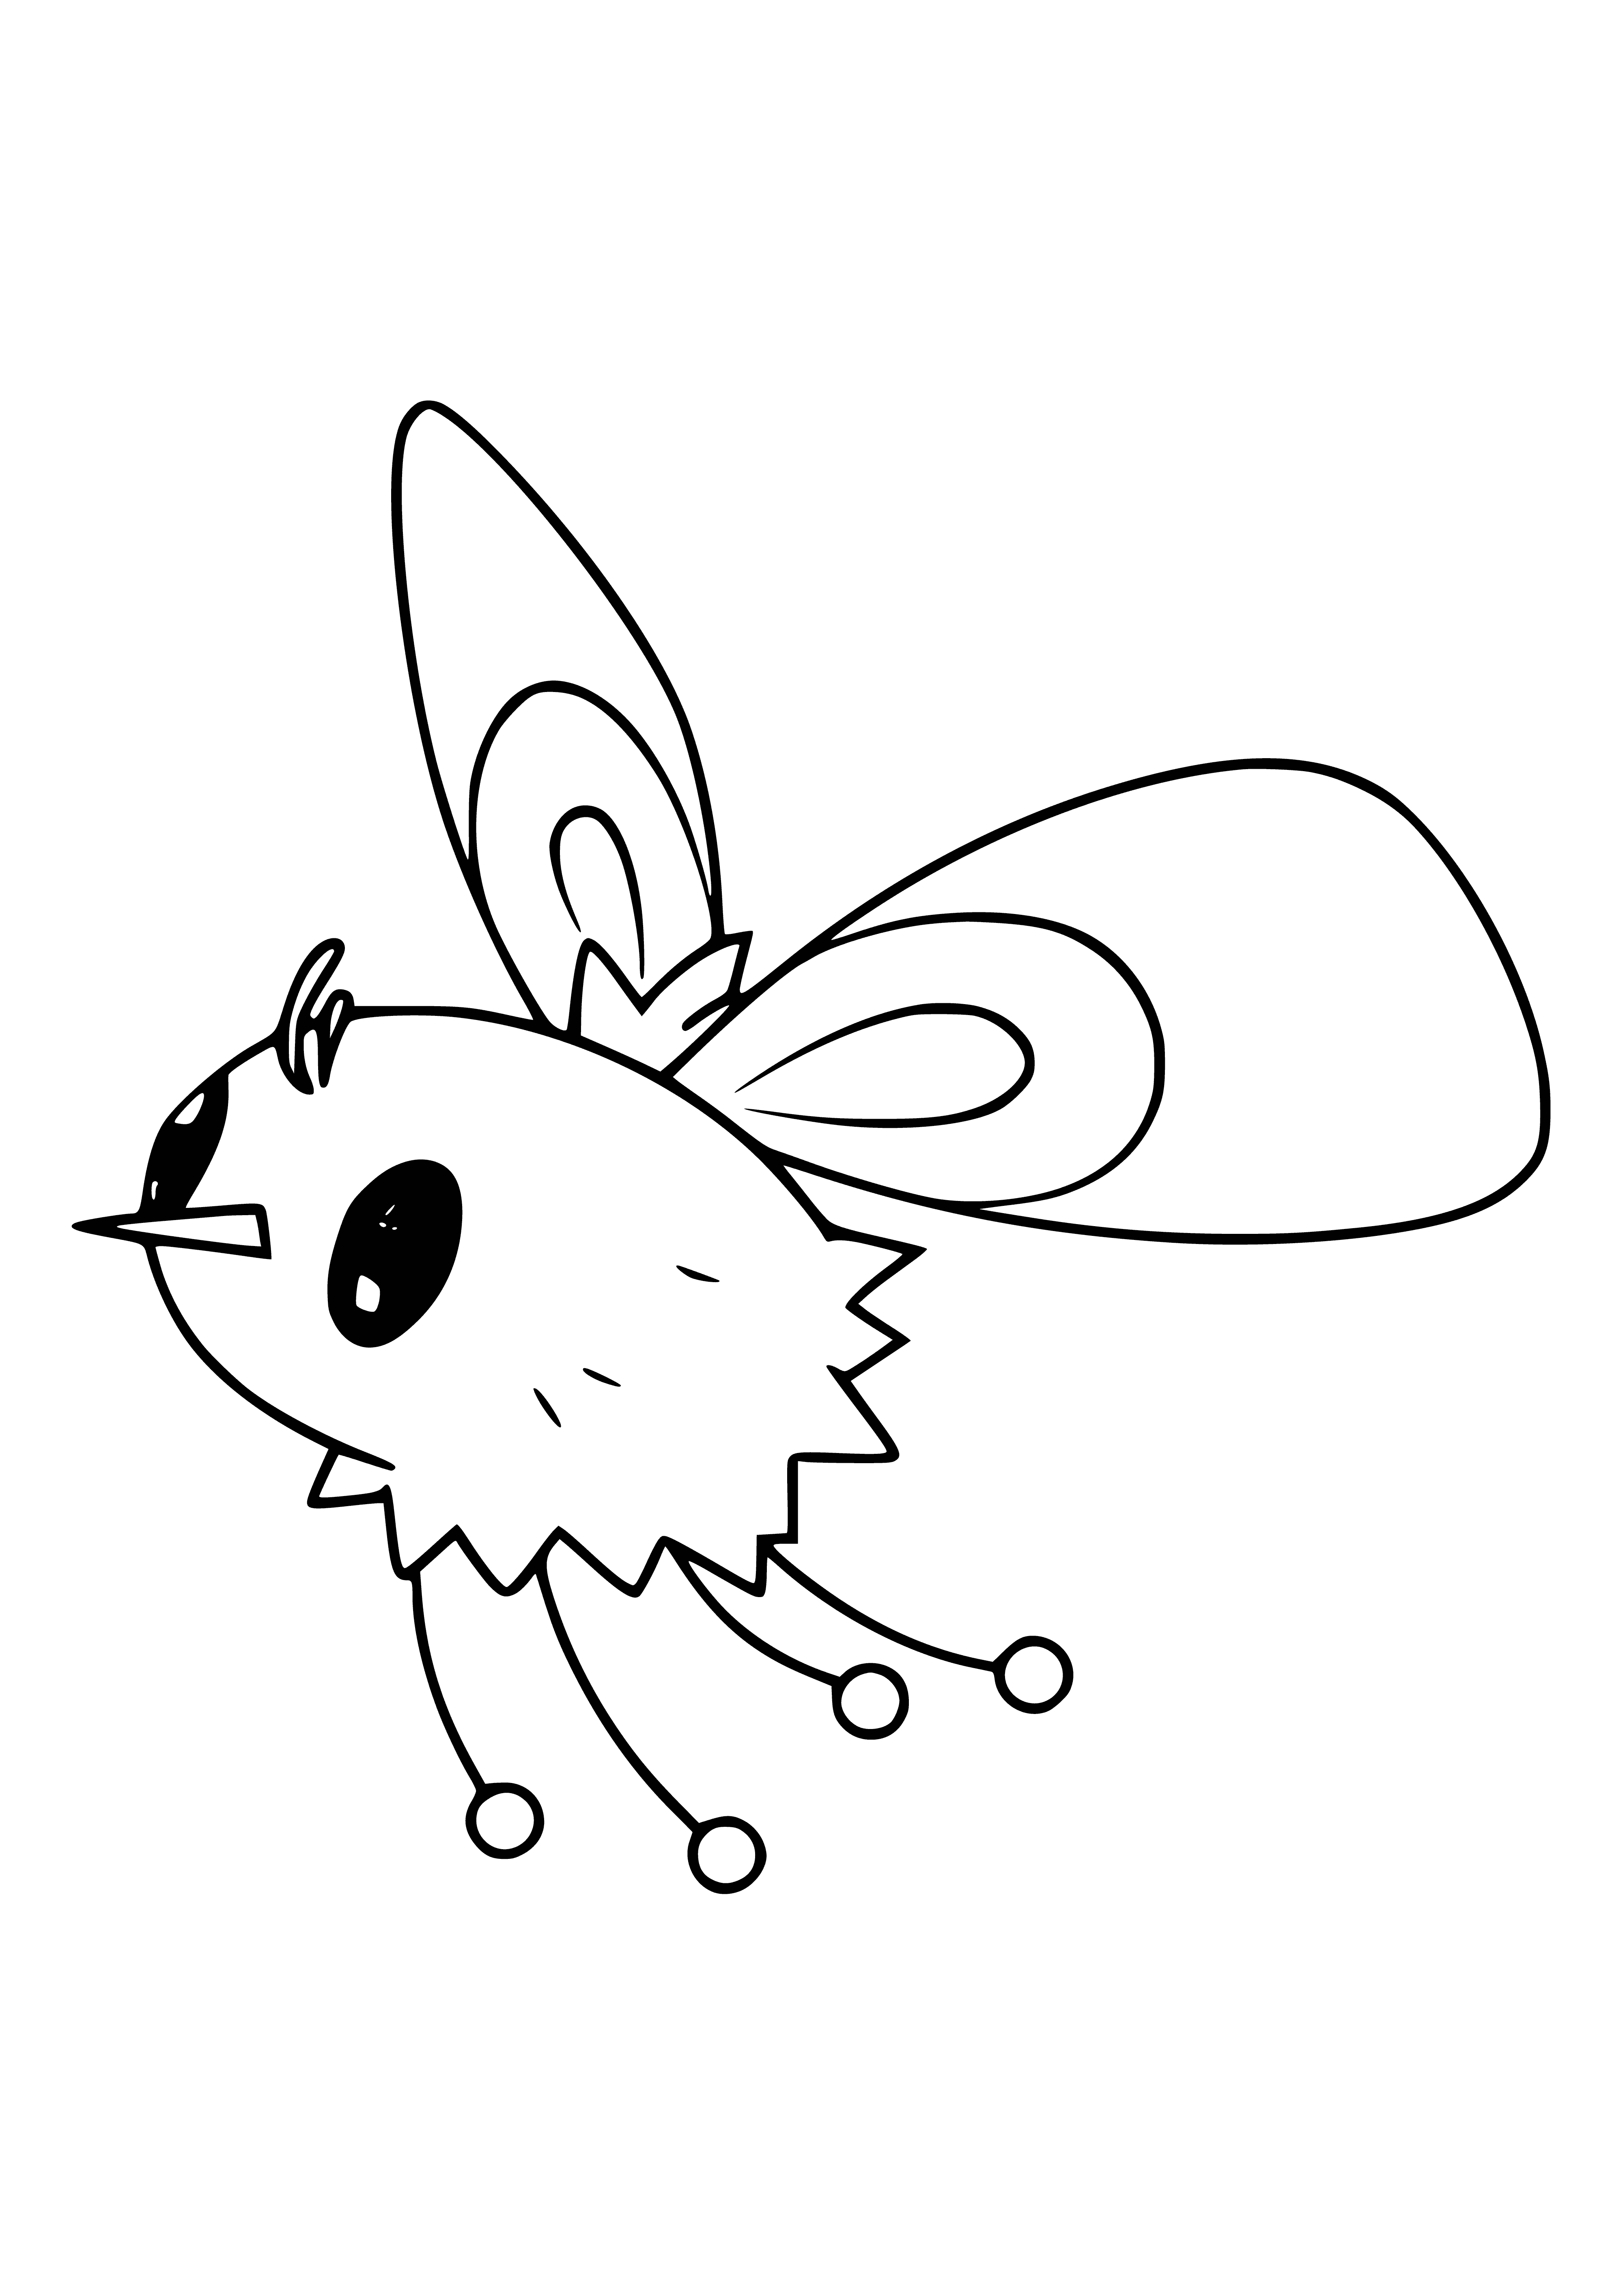 coloring page: Cutiefly is a small, yellow bug-type Pokemon with black and white heart-shaped wings, big black eyes, & black/white striped legs & abdomen.